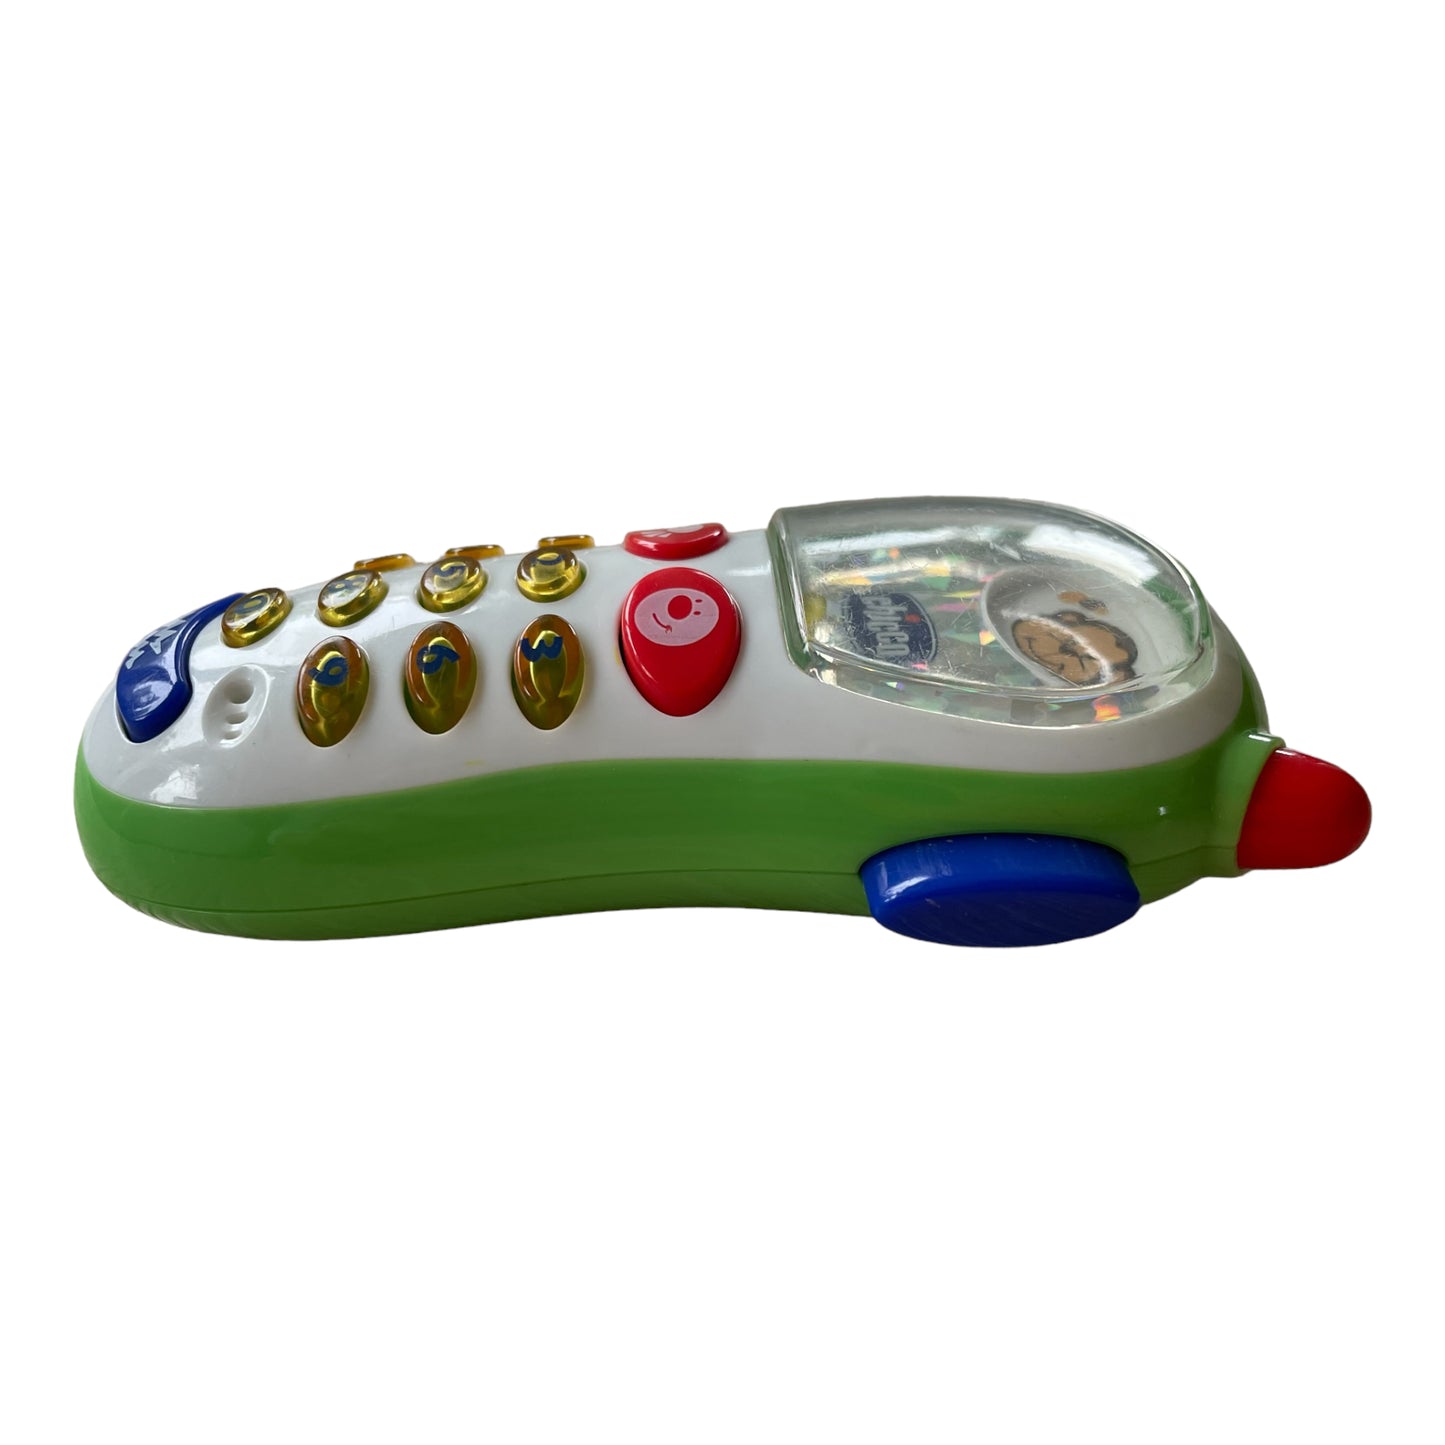 Chicco Baby Mobile Phone with caméra